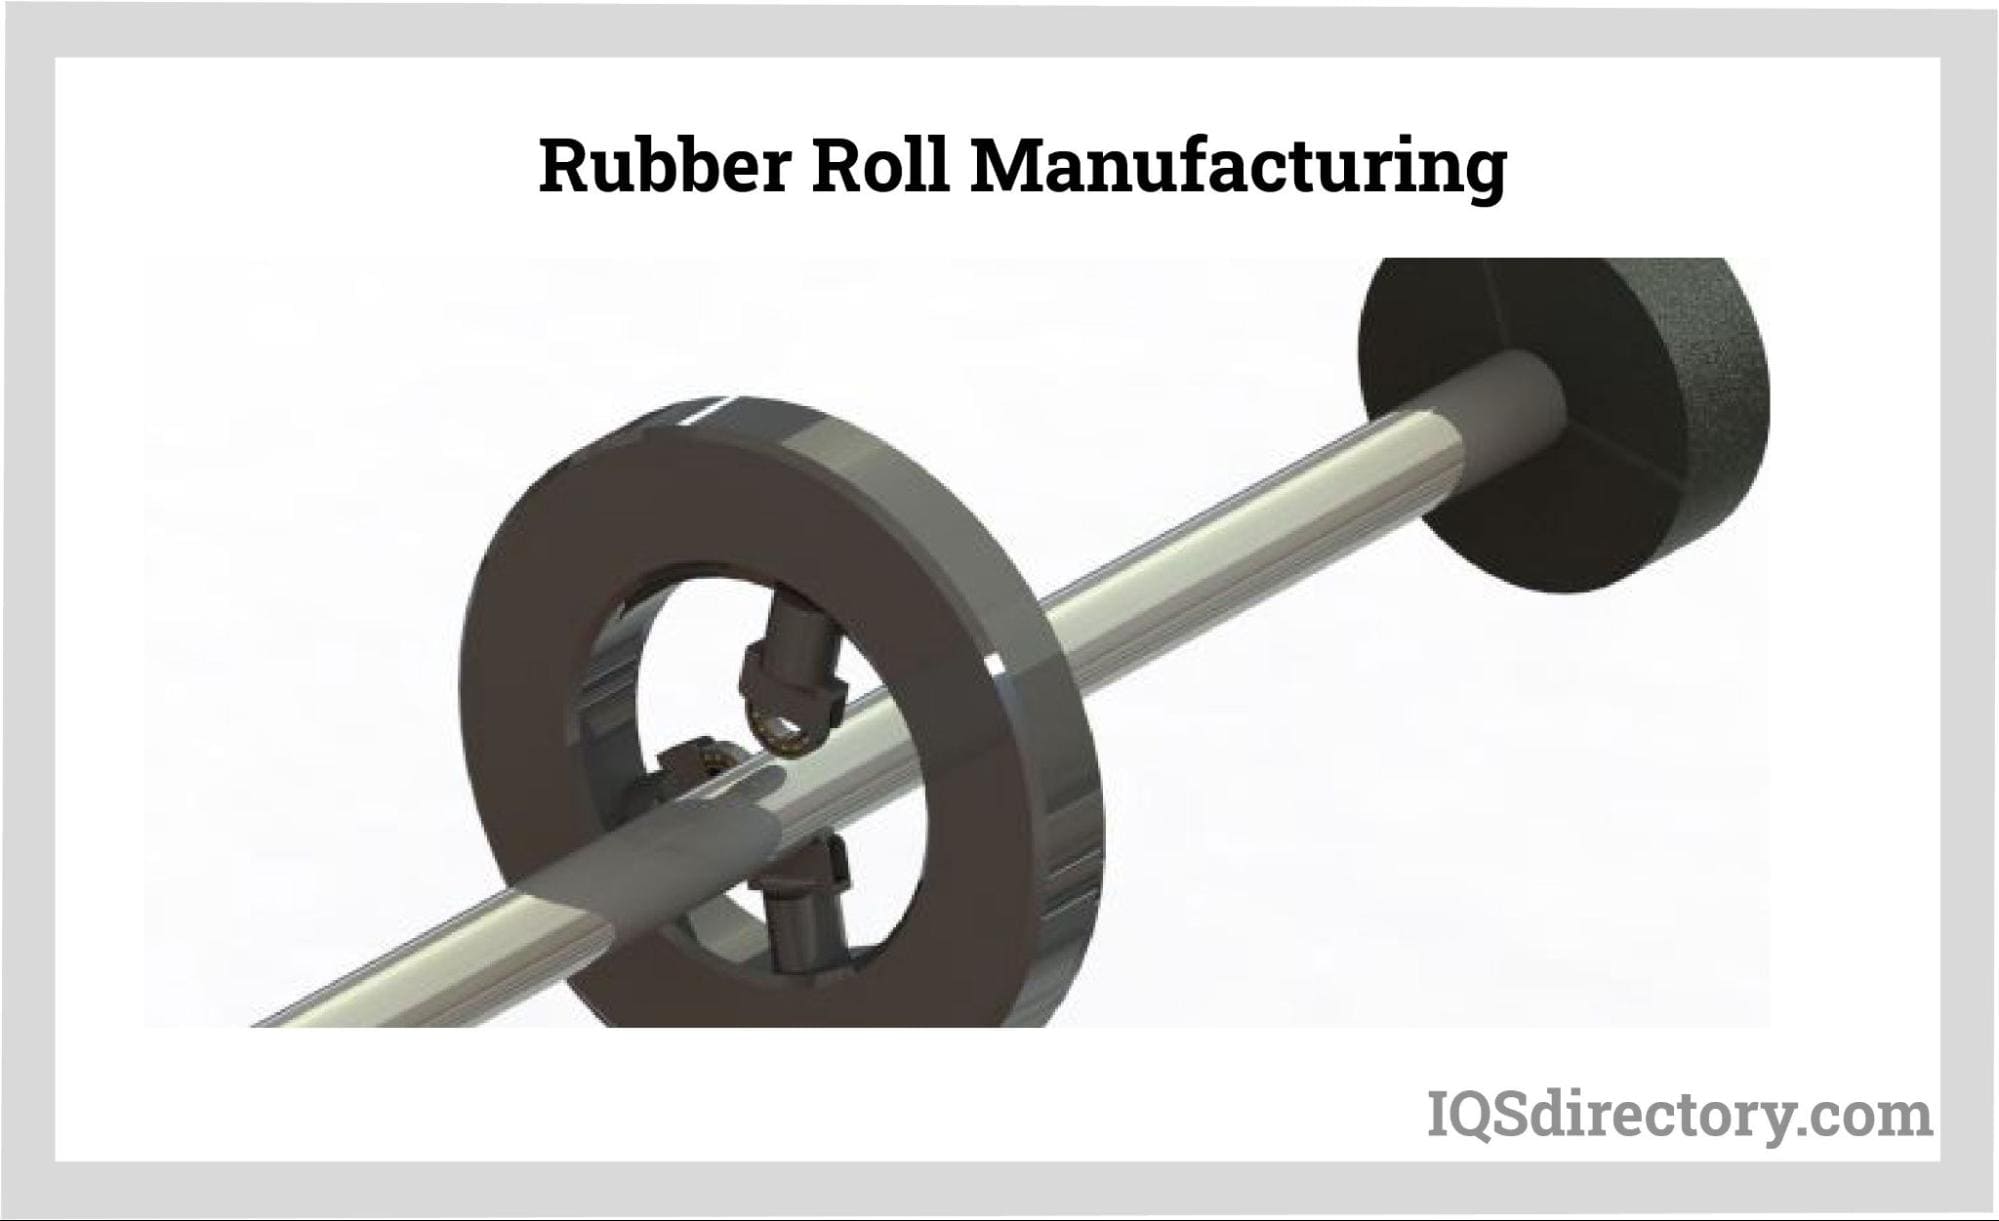 Rubber Roll Manufacturing